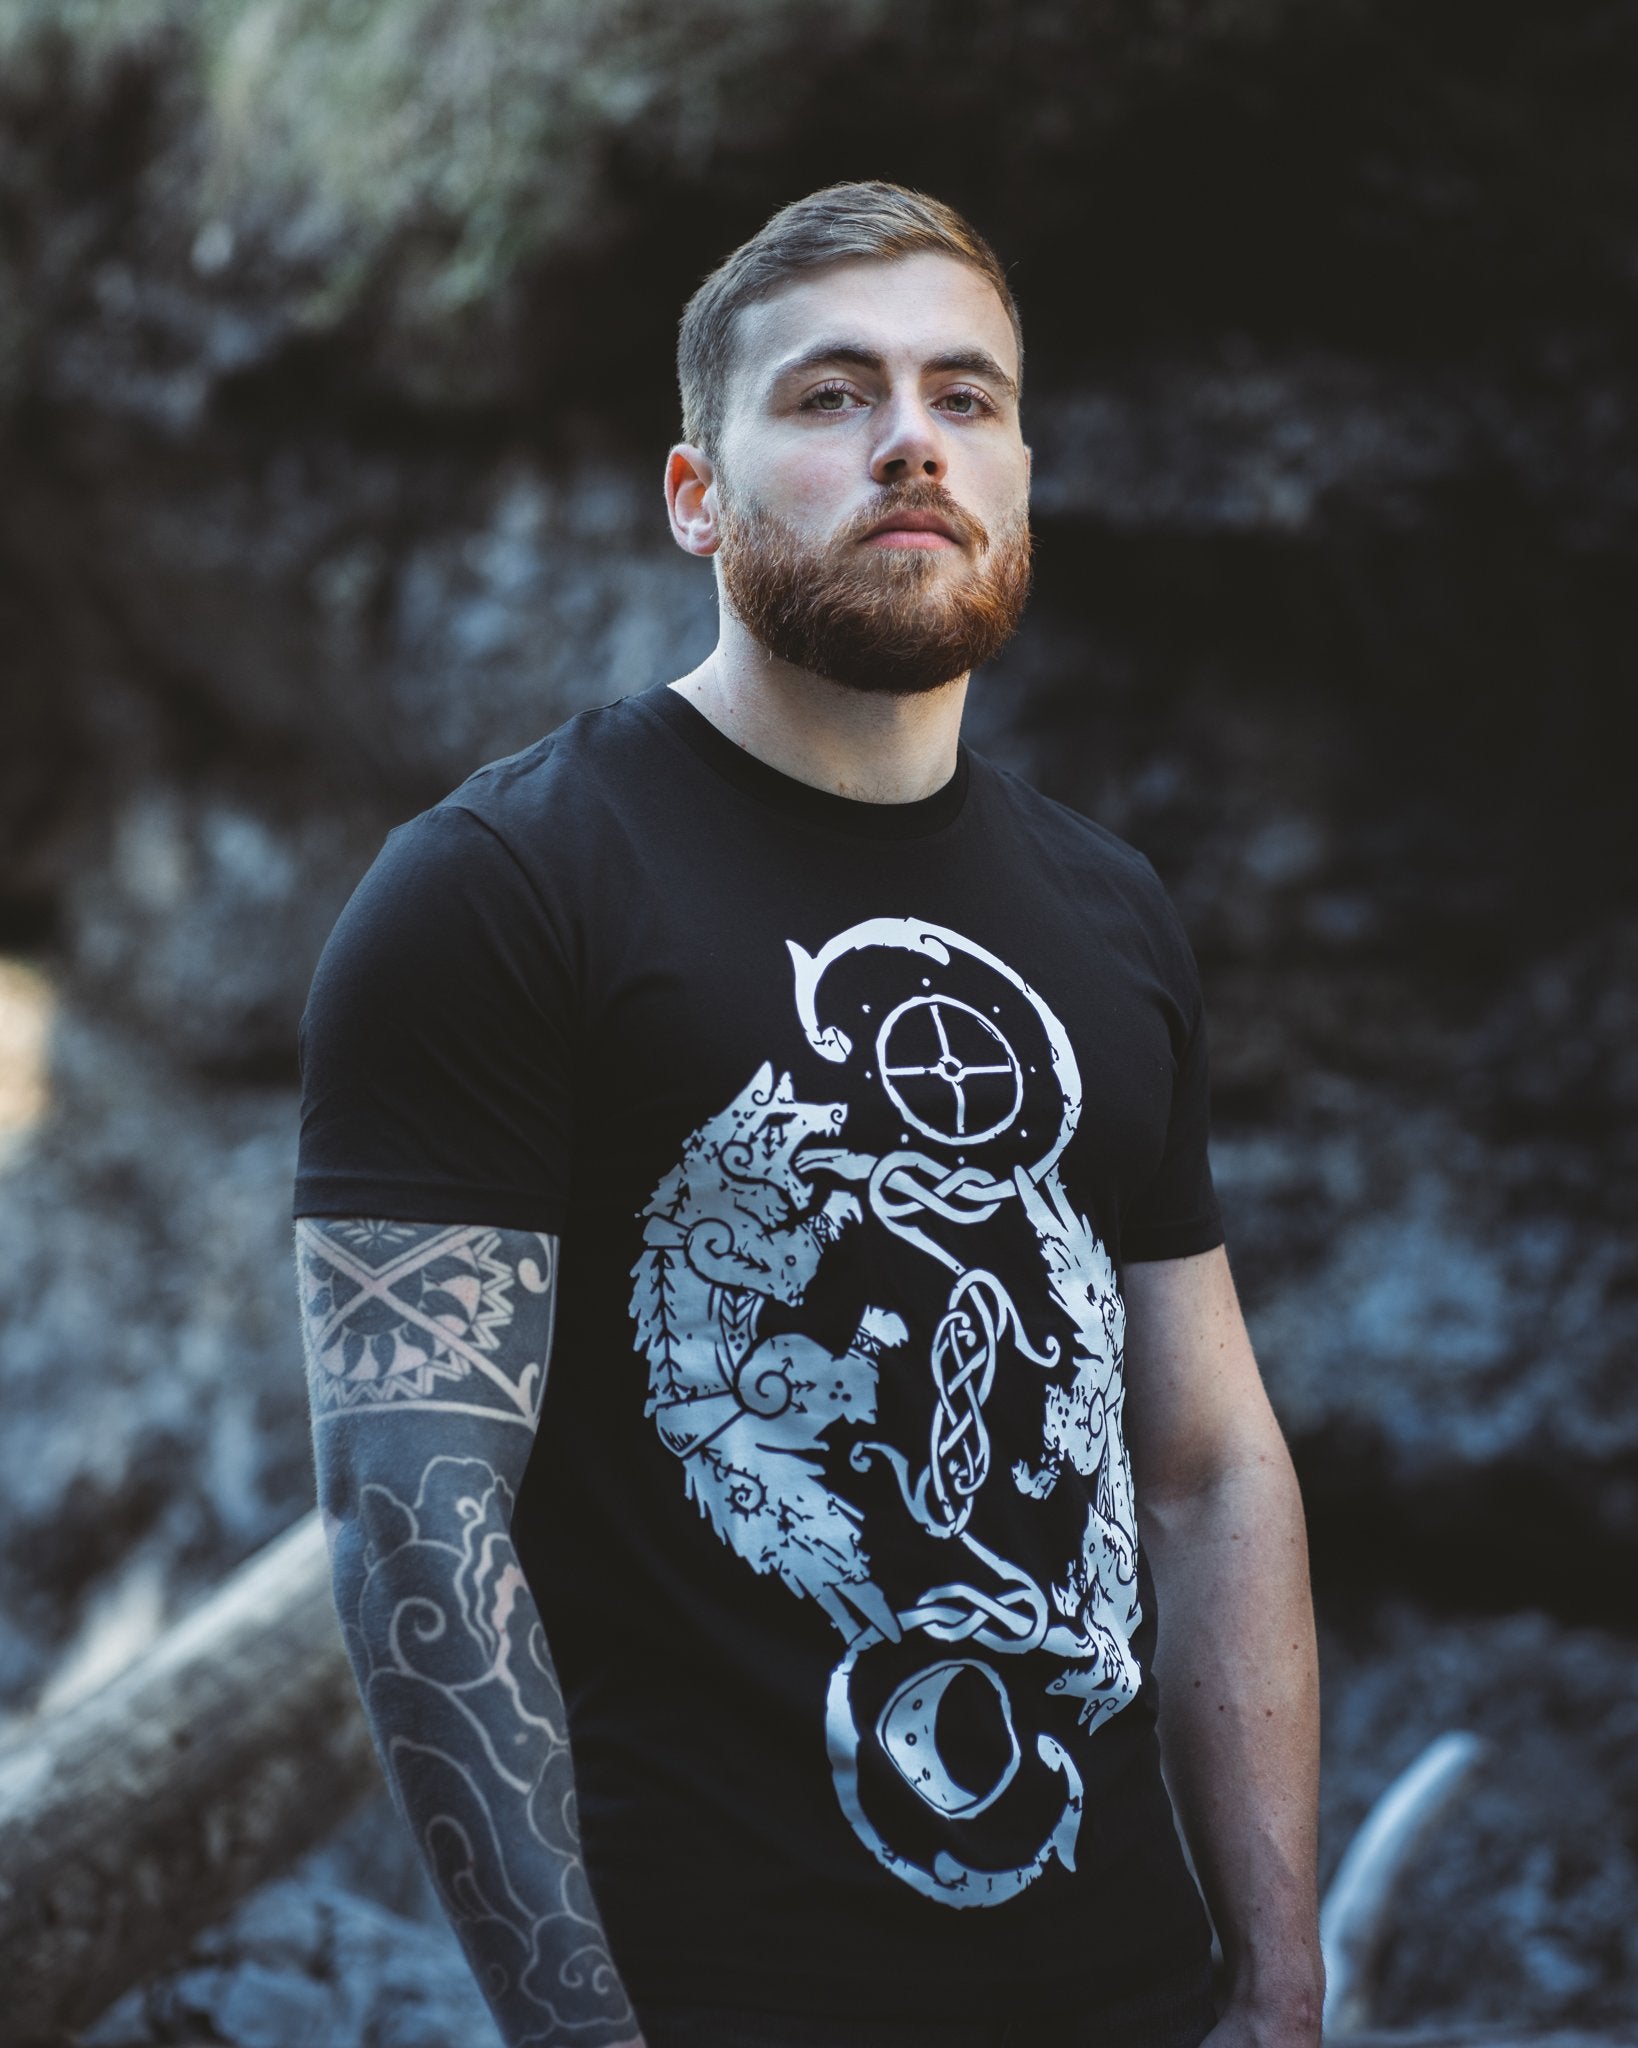 Skol Hati, Sol Mani, Descended from Odin, Wanderers Warriors,Organic T-shirts, Staithes Hoodie, Merino Wool Hoodie, Odin, TYR, Thor, Ragnar, Bjorn Ironside, Vikings, Anglo Saxon, Norse, Fitness Gear, Horns, Jewellery, Silver